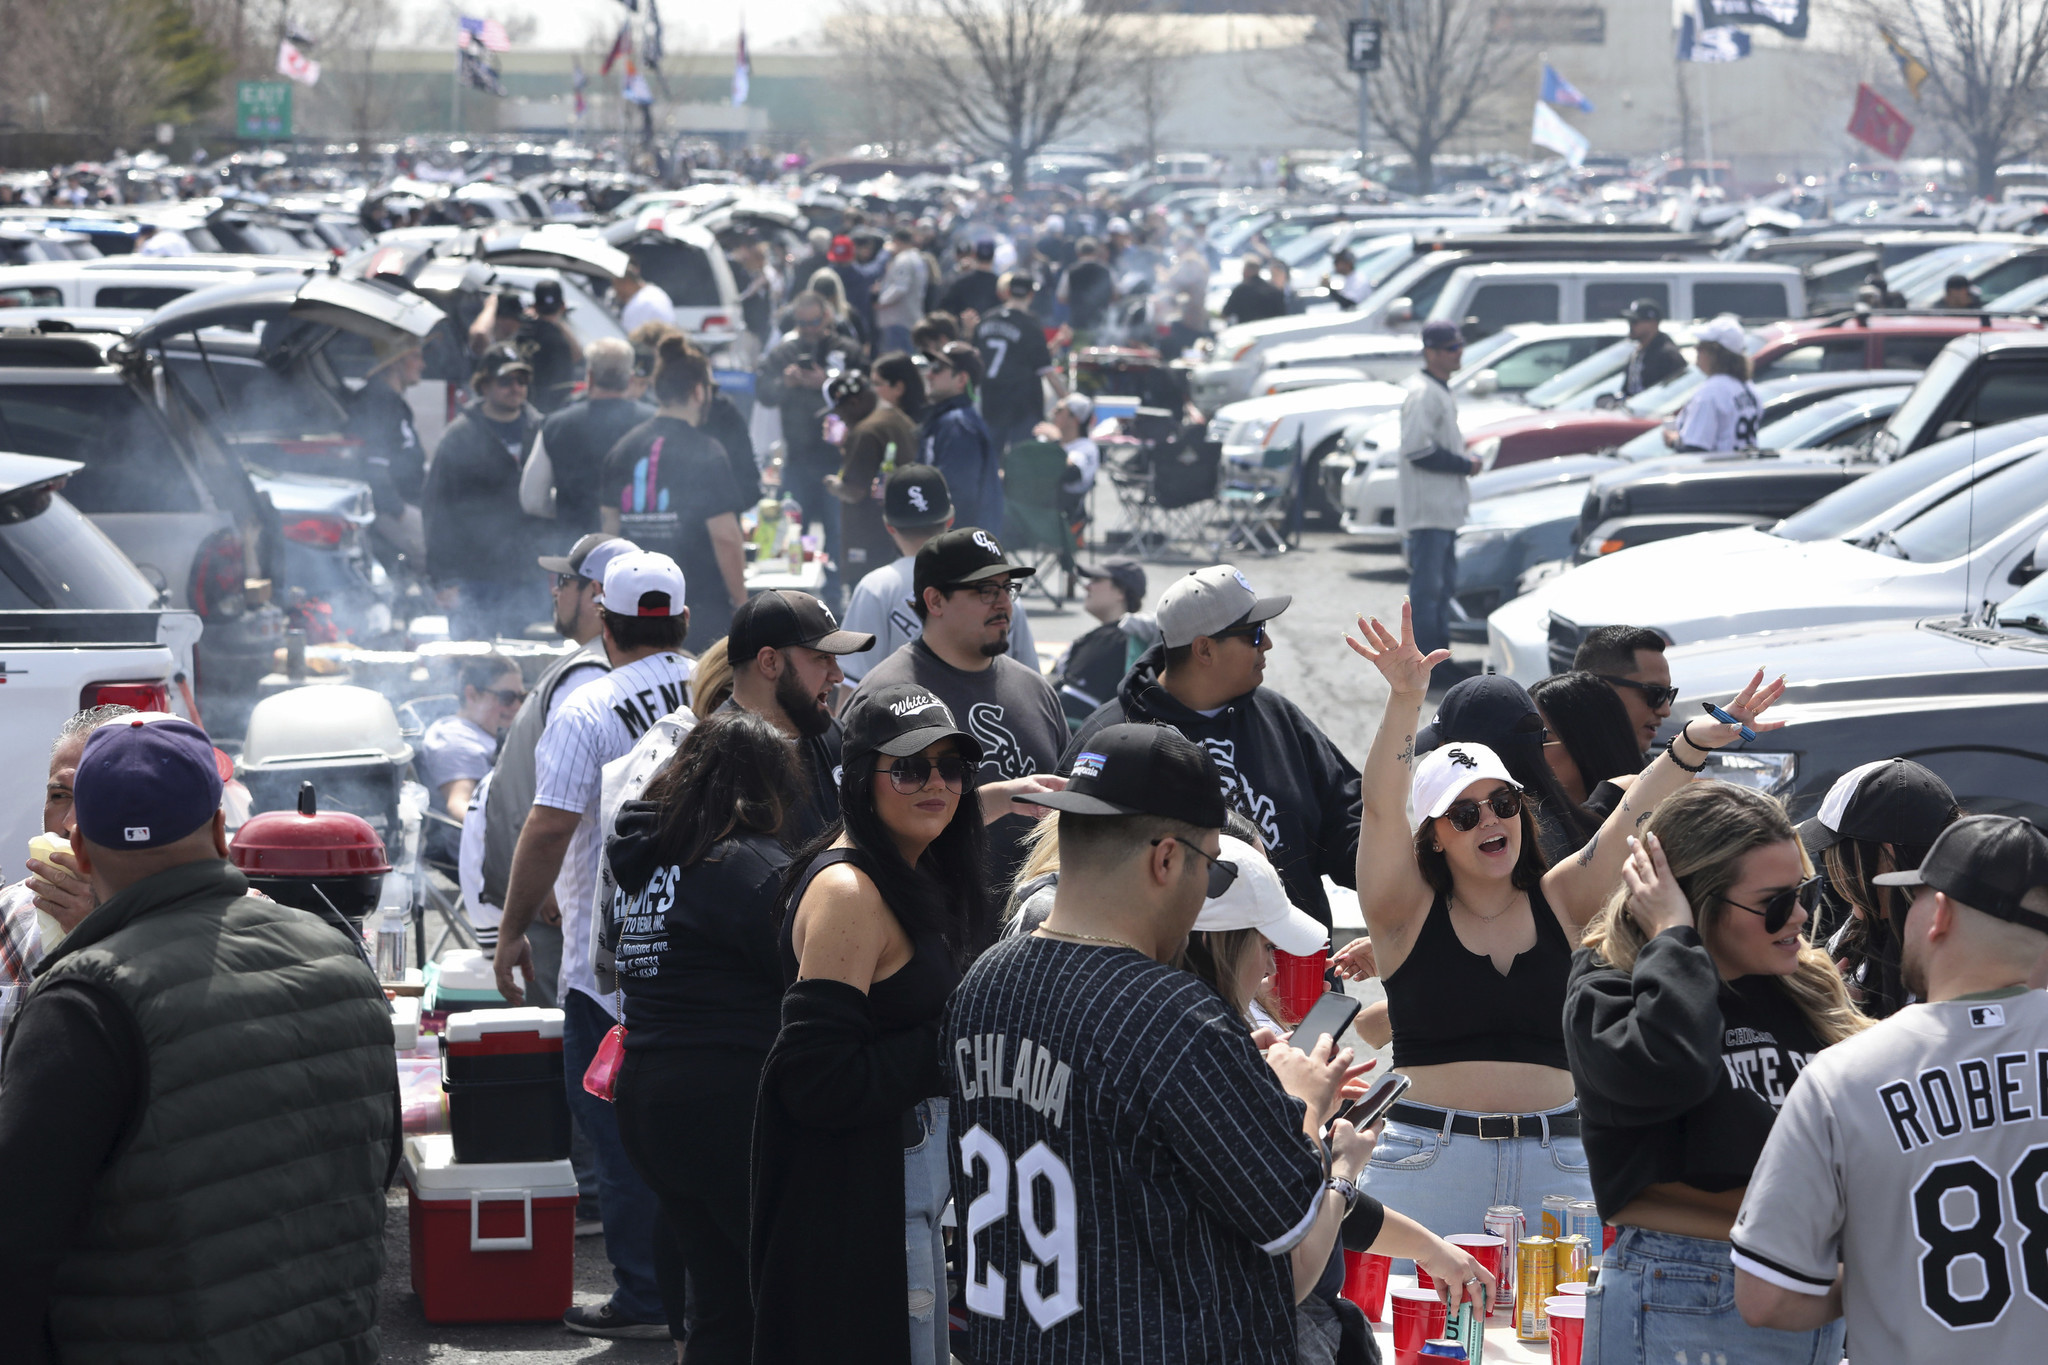 Baseball fans tailgate and smile in the sun at White Sox home opener - CBS  Chicago